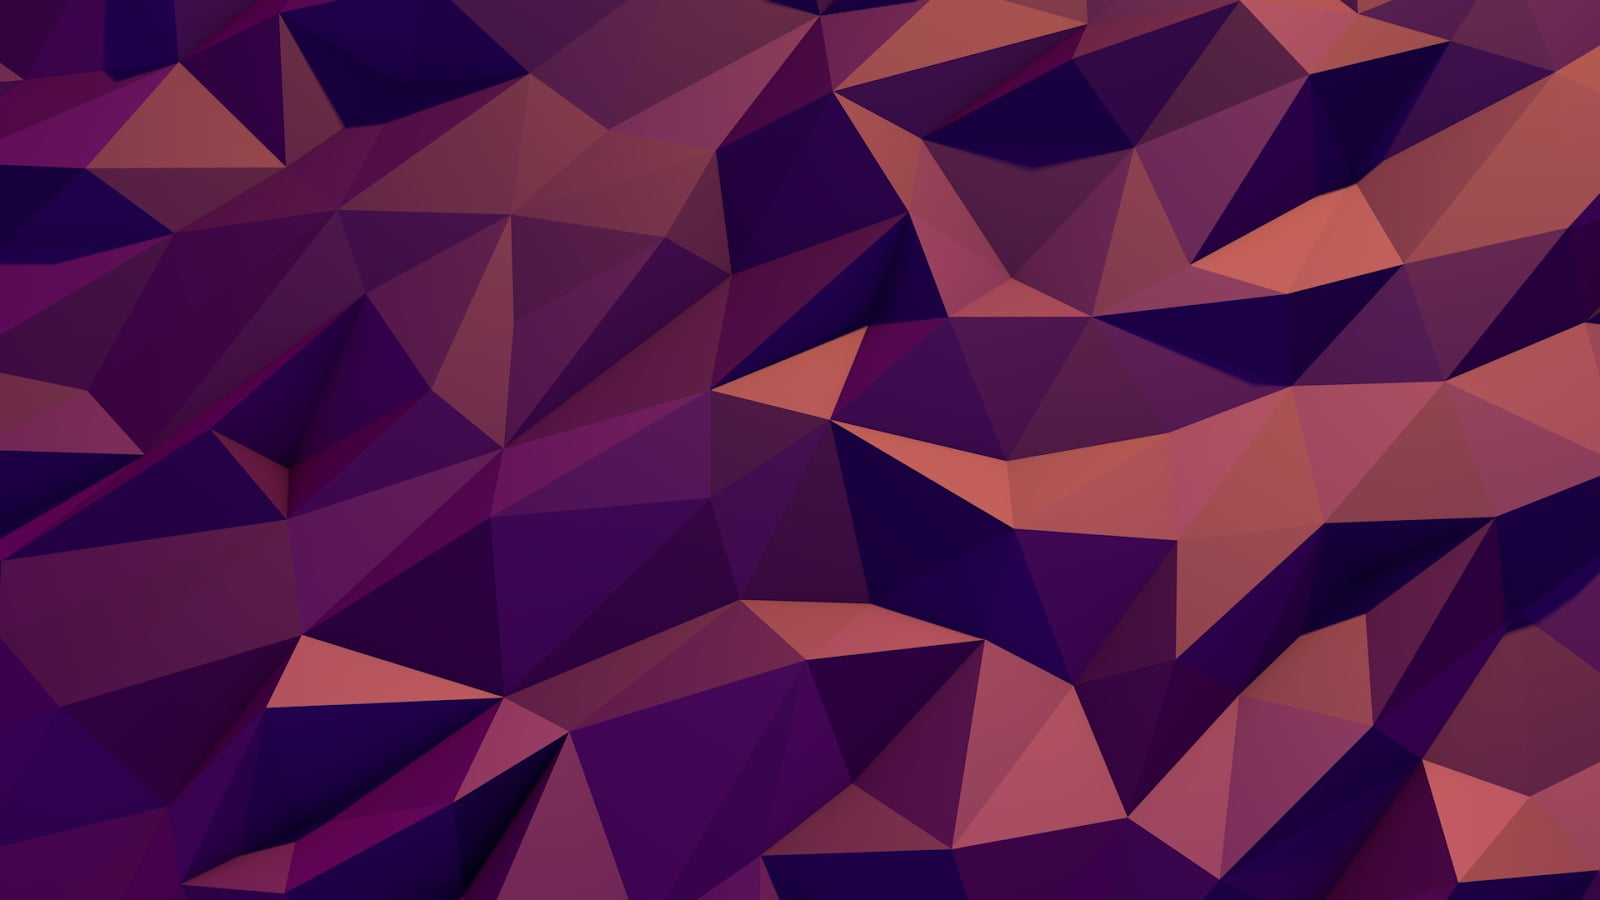 red and purple area rug, low poly, digital art, pattern, triangle shape